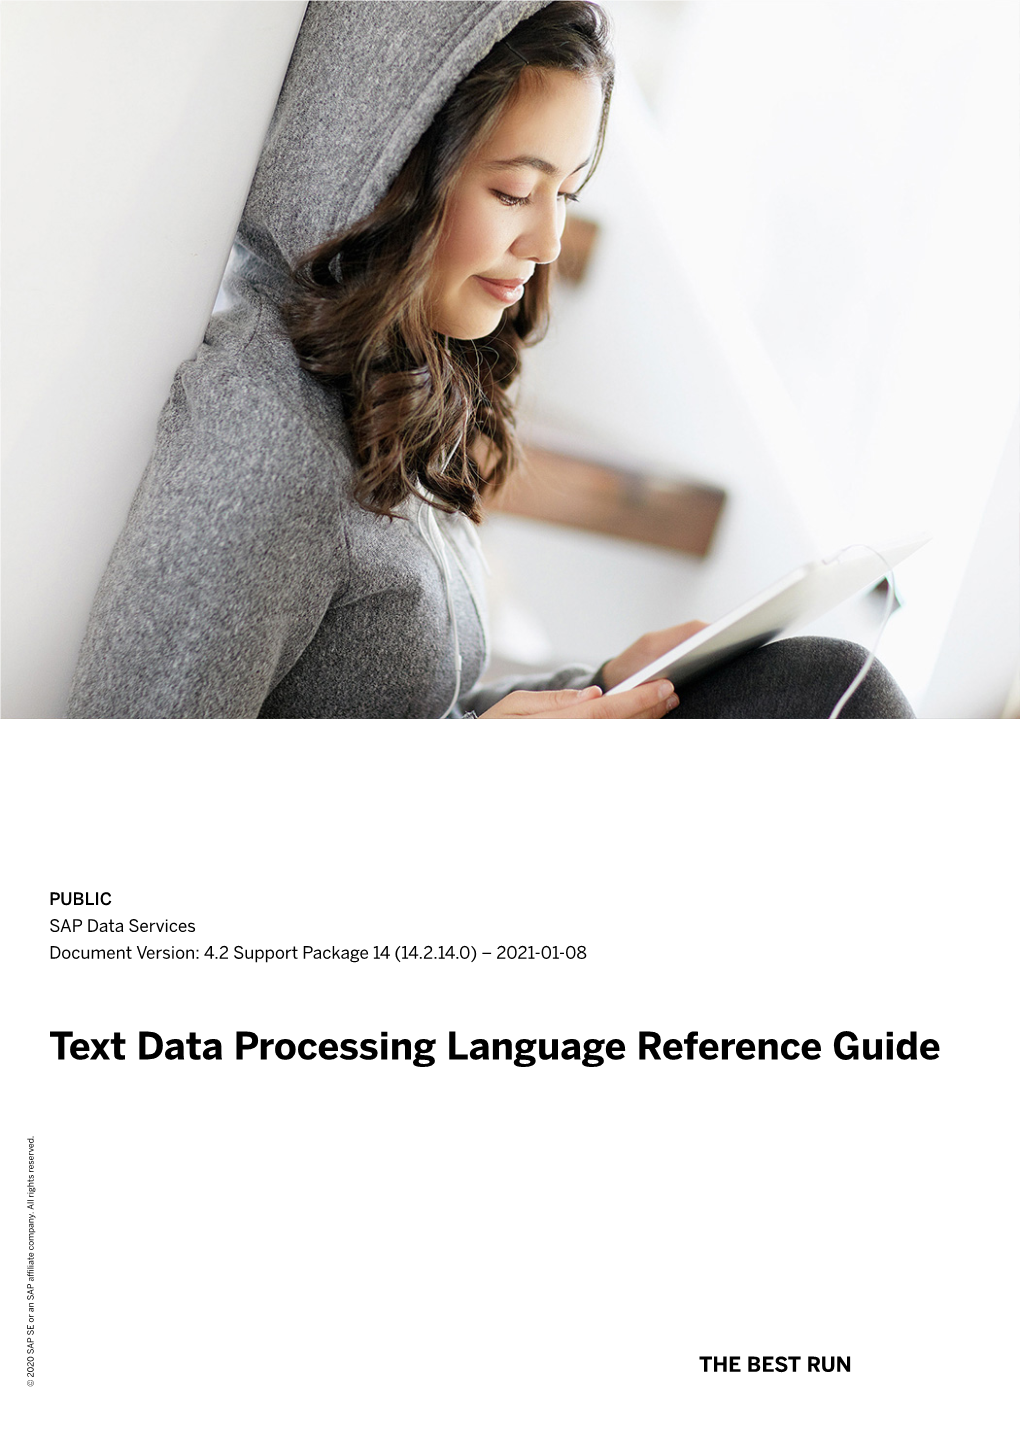 Text Data Processing Language Reference Guide Company